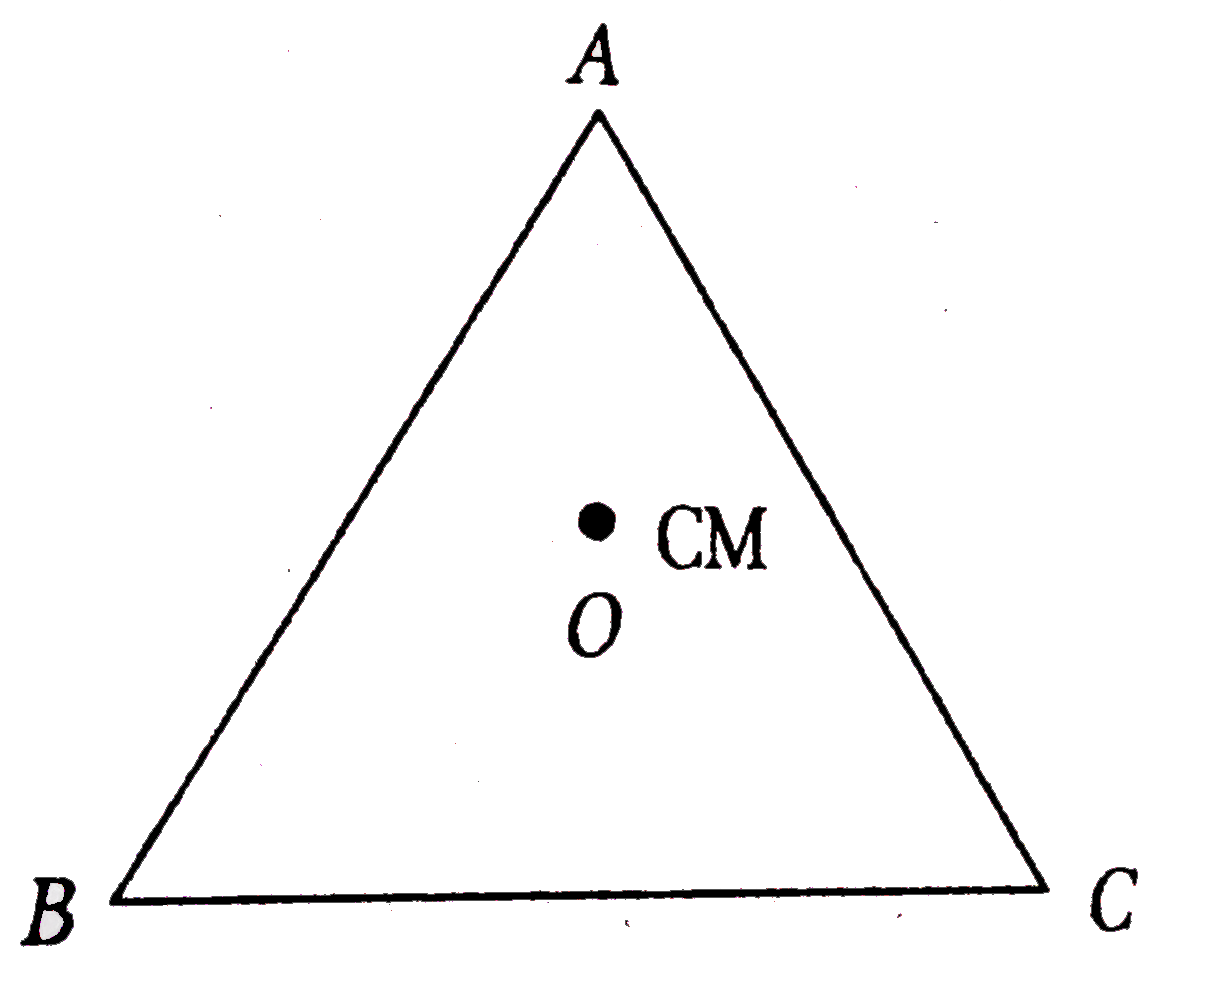 Three rods each of mass m and length l are joined togther to form an equilateral triangle as shown in figure. Find the moment of inertia of the system about on axis passing through its centre of mass and perpendicular to the plane of the triangle